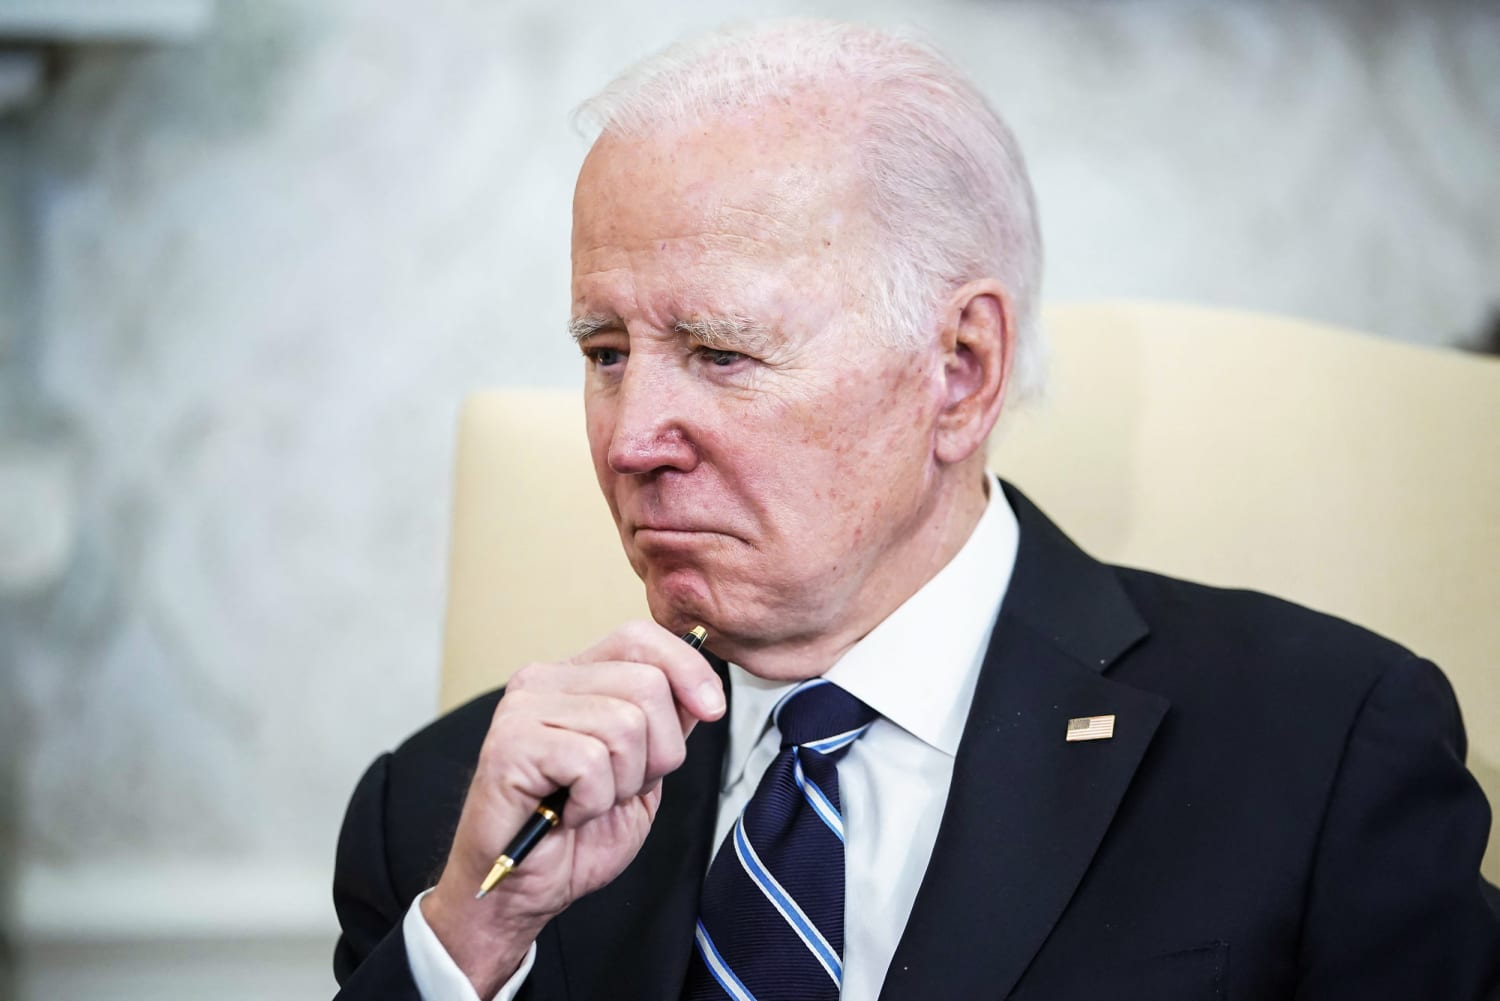 After criticism for silence, Biden White House takes questions about classified documents